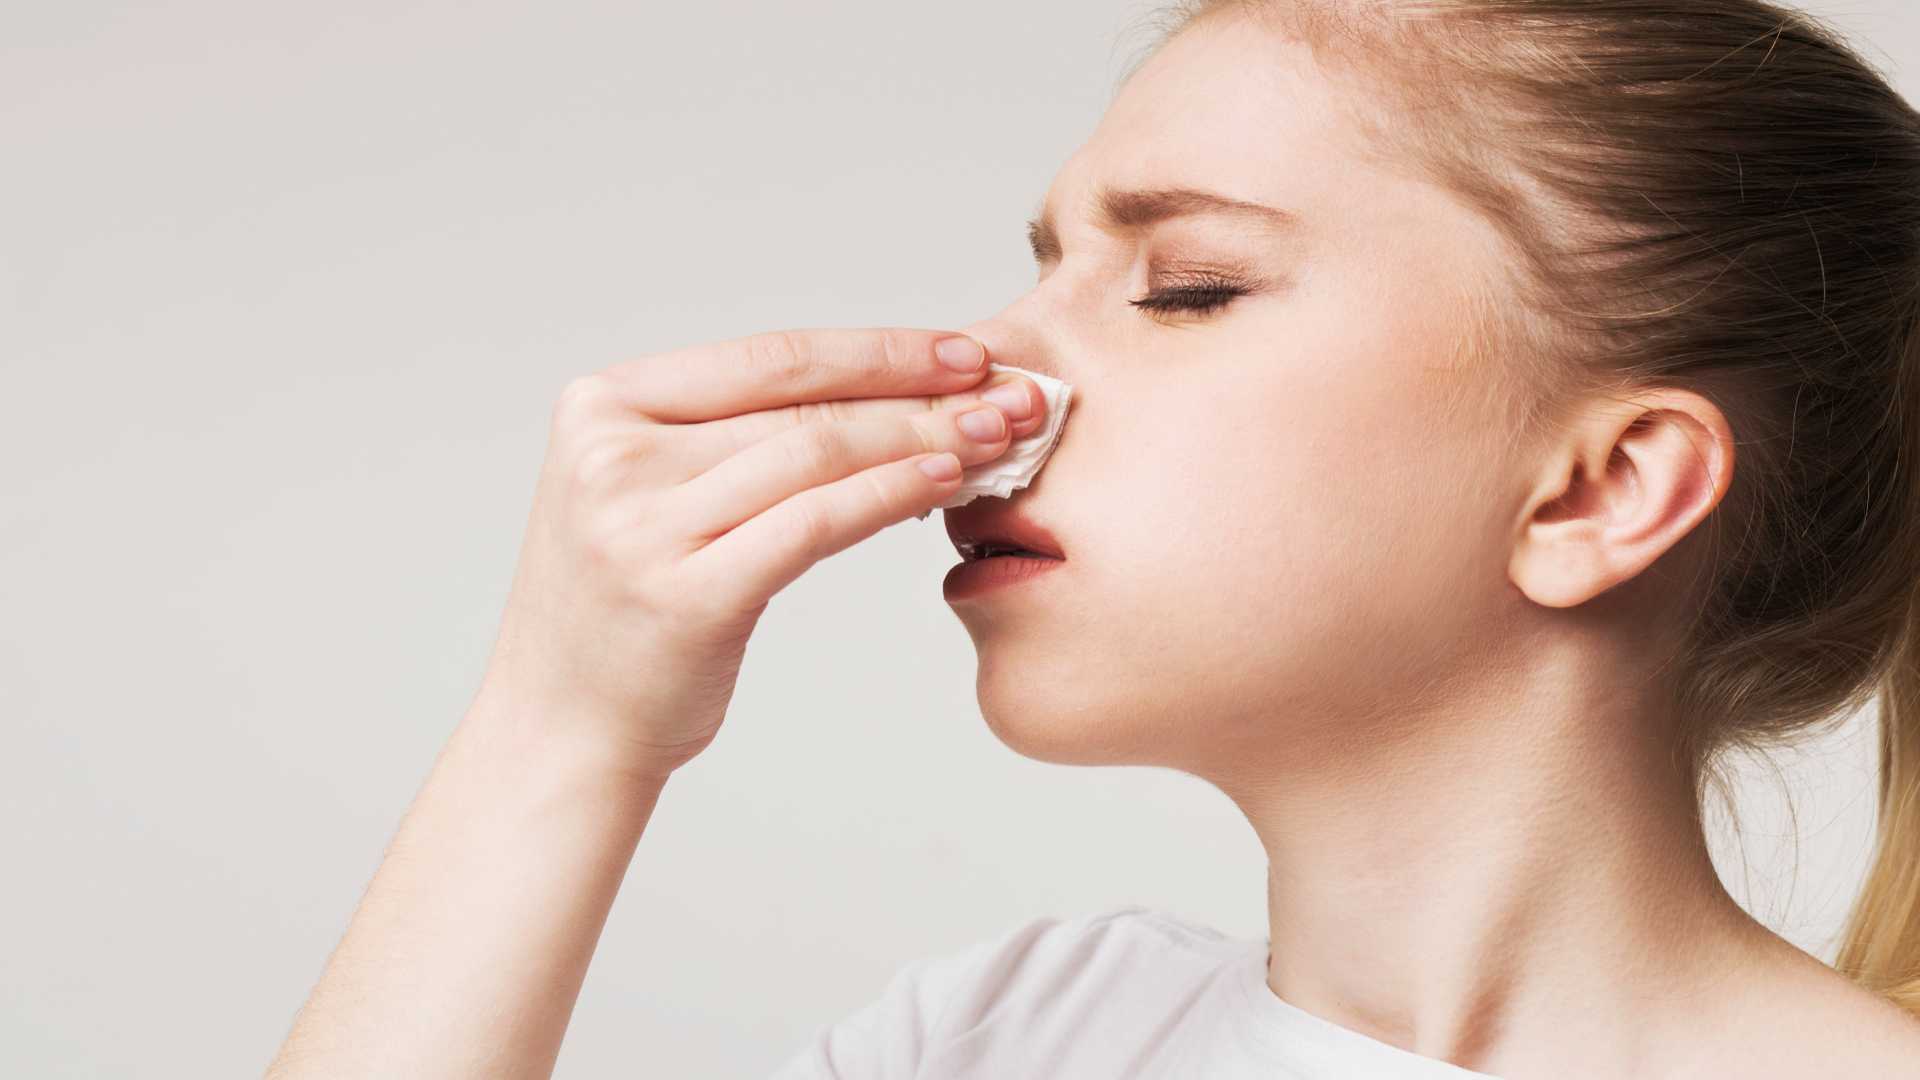 Nasal Congestion: Symptoms, Causes, Treatments